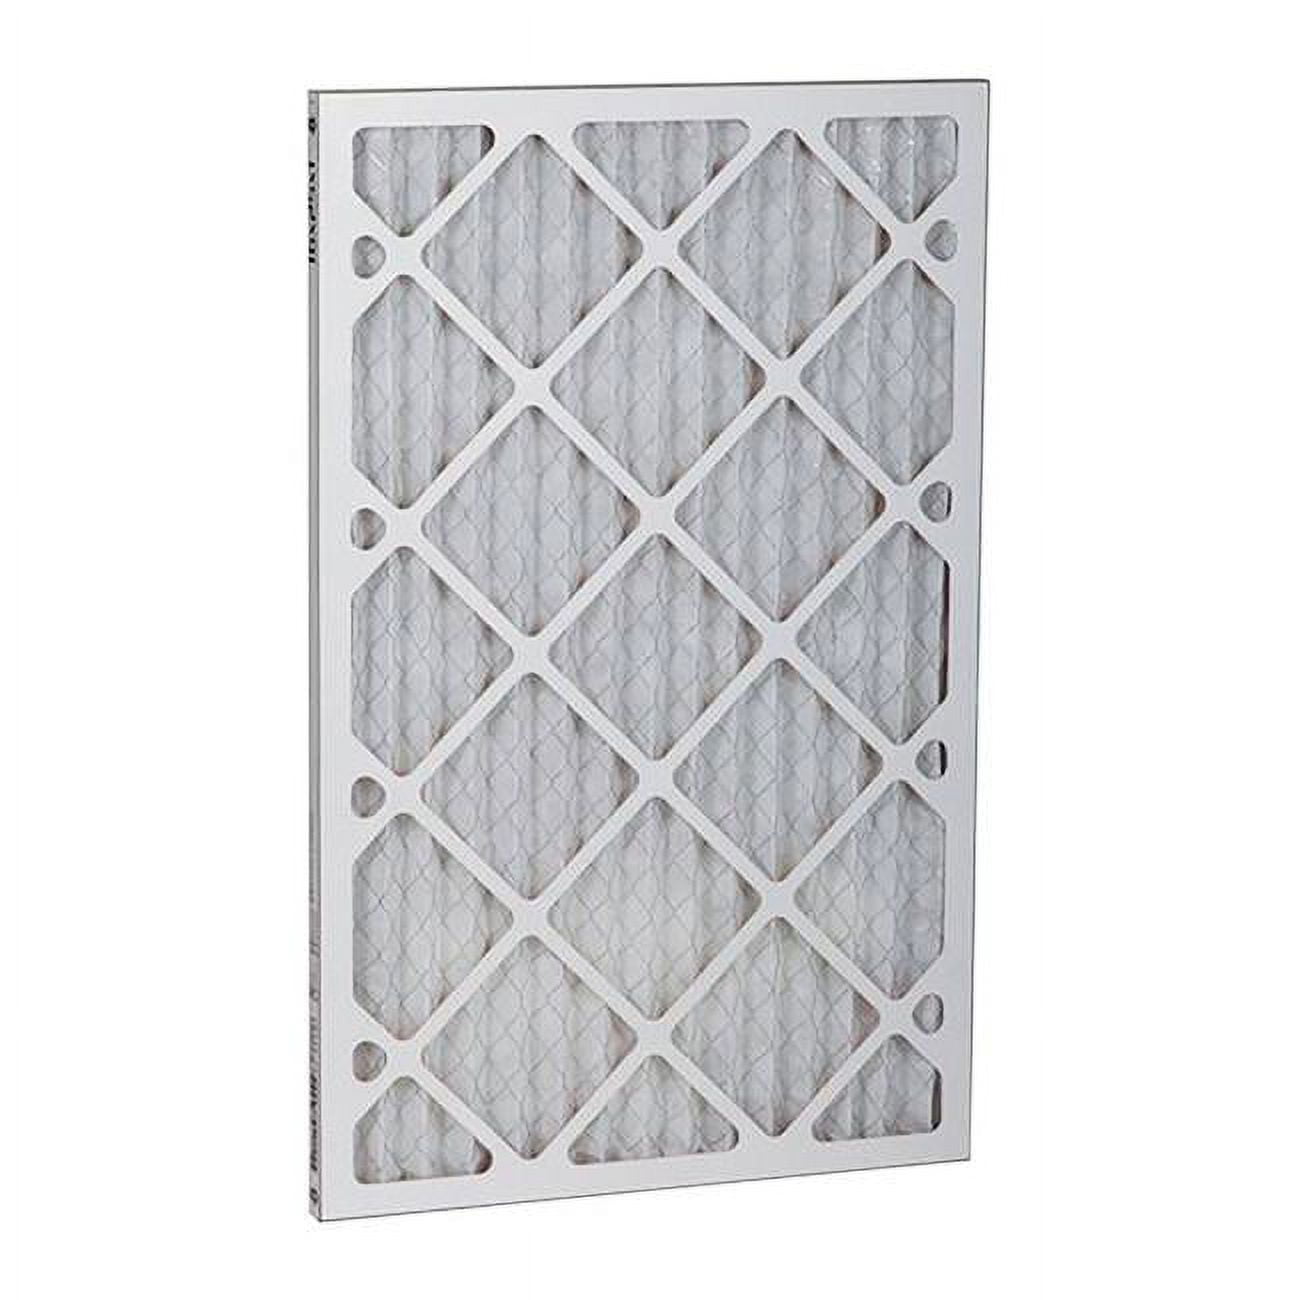 Picture of Best Air 4823258 16 x 20 x 1 in. 8 MERV Air Filter - Case of 12